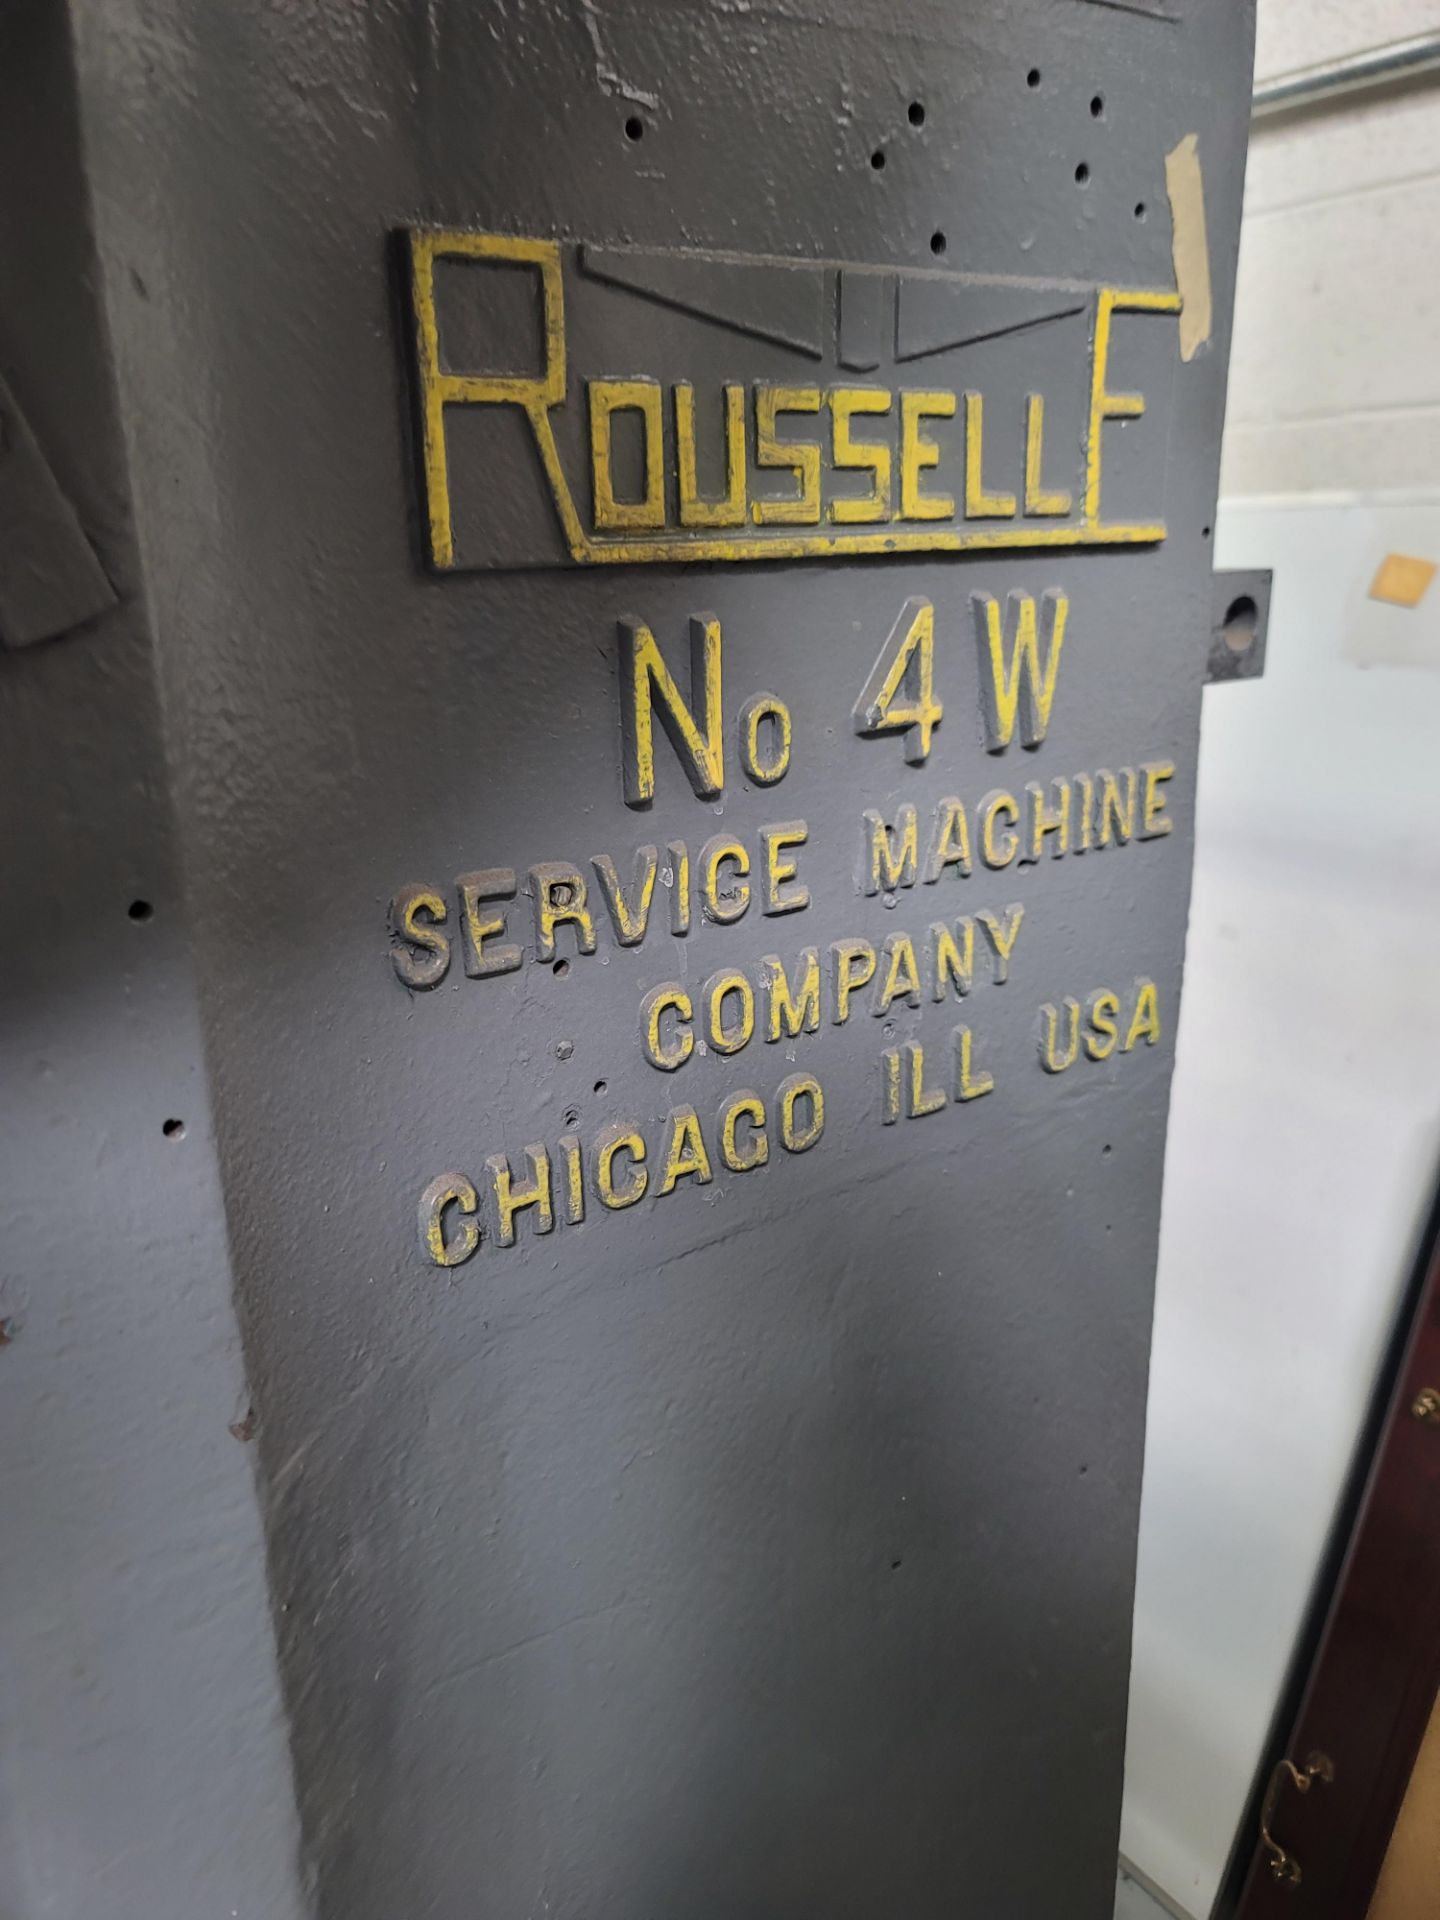 ROUSSELLE NO. 4W GAP FRAME DOUBLE CRANK PRESS, 40 TON, 48" X 14" BED, OPEN BACK/STATIONARY, S/N 330 - Image 4 of 4